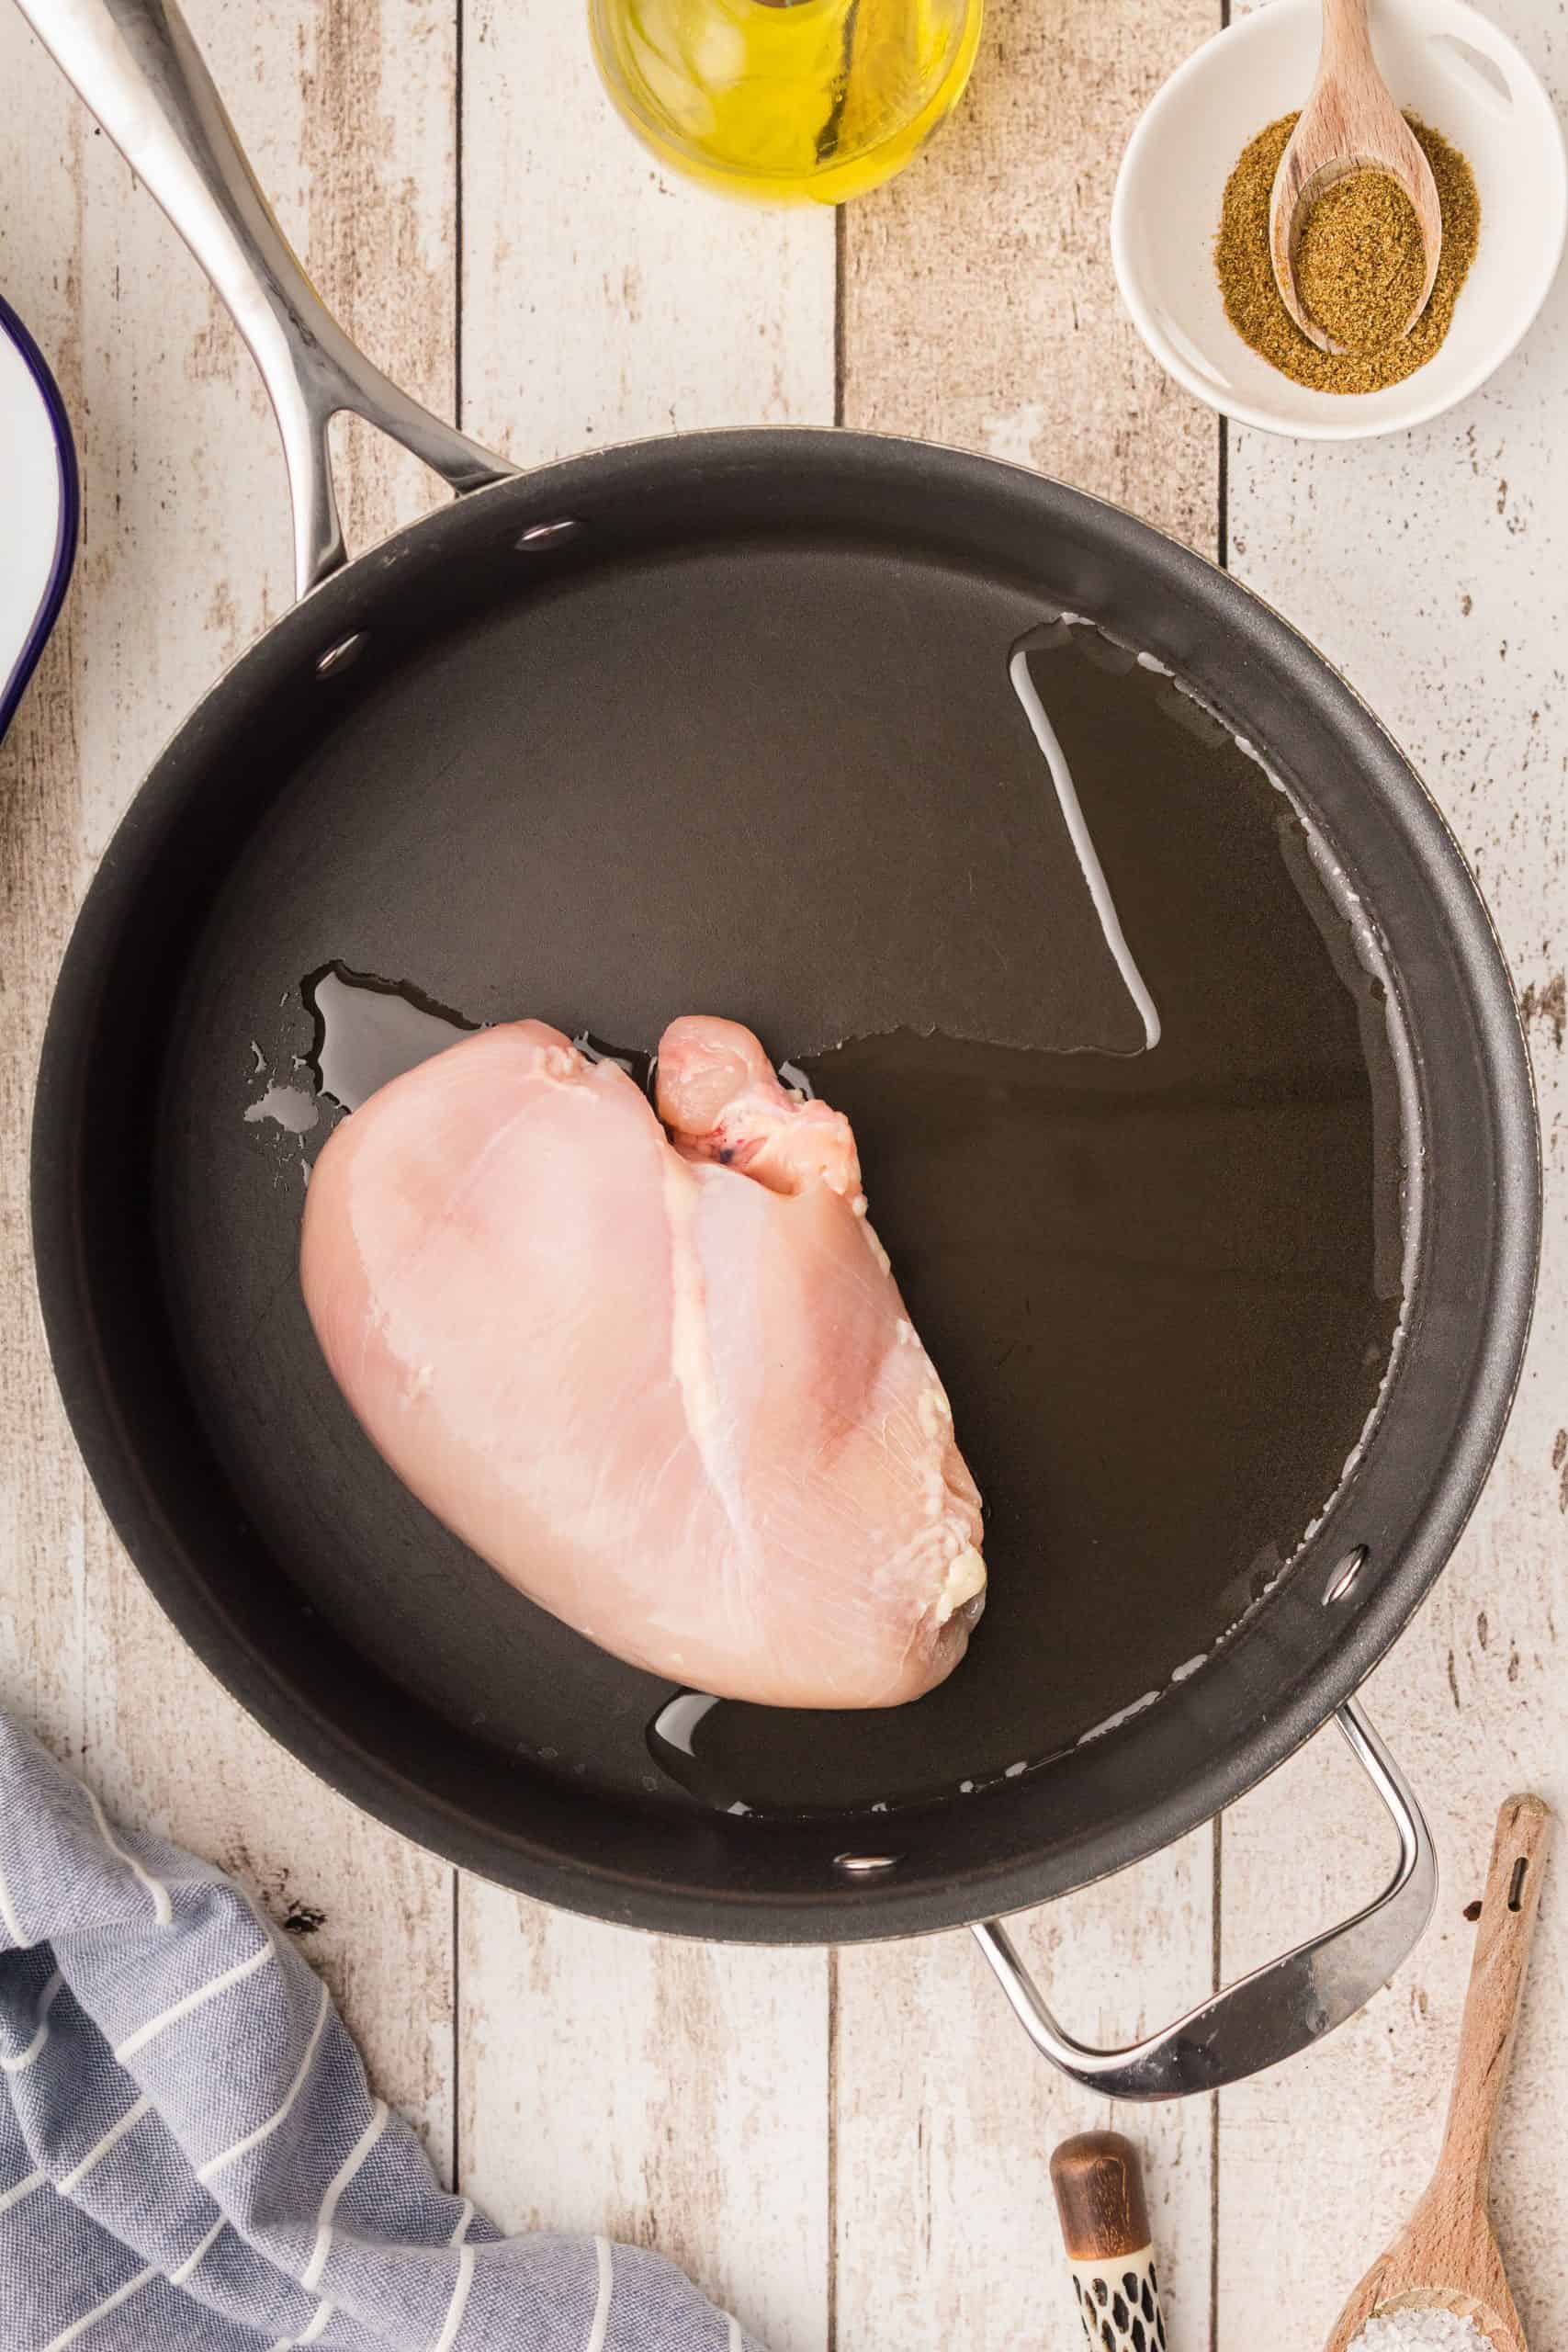 Chicken cooking in oil in pan.